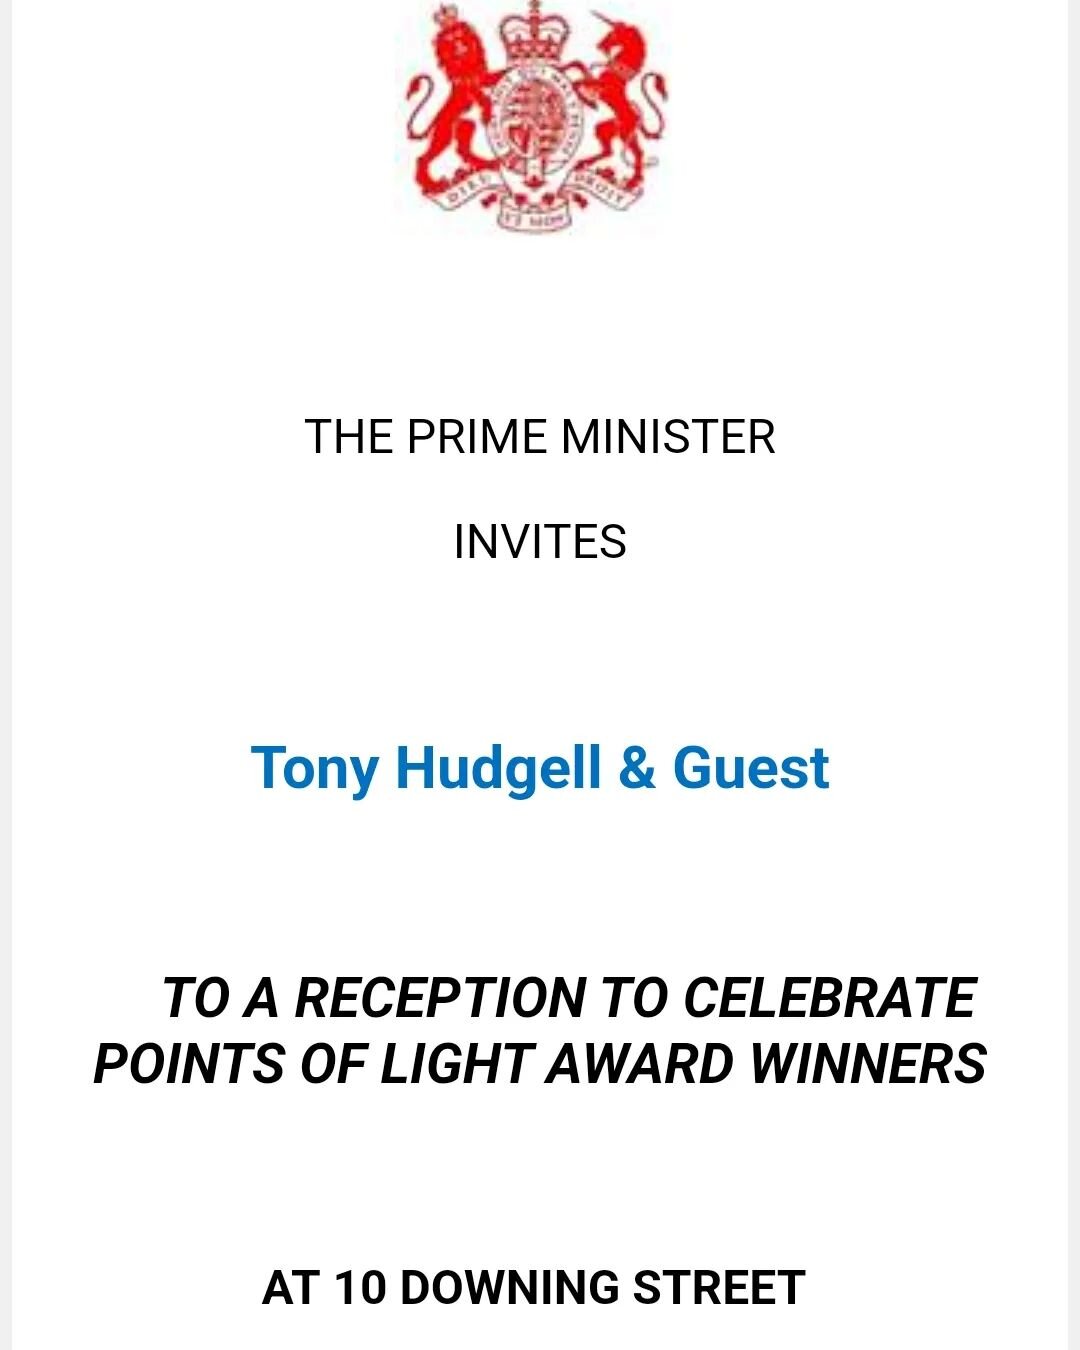 How exciting Tony Bear has been invited to 10 Downing Street to celebrate his Points of Light Award for all his fundraising efforts for @evelinalondonchildrenscharity raising over 1.6 million pounds for the hospital that saved his life 💙
@10downings